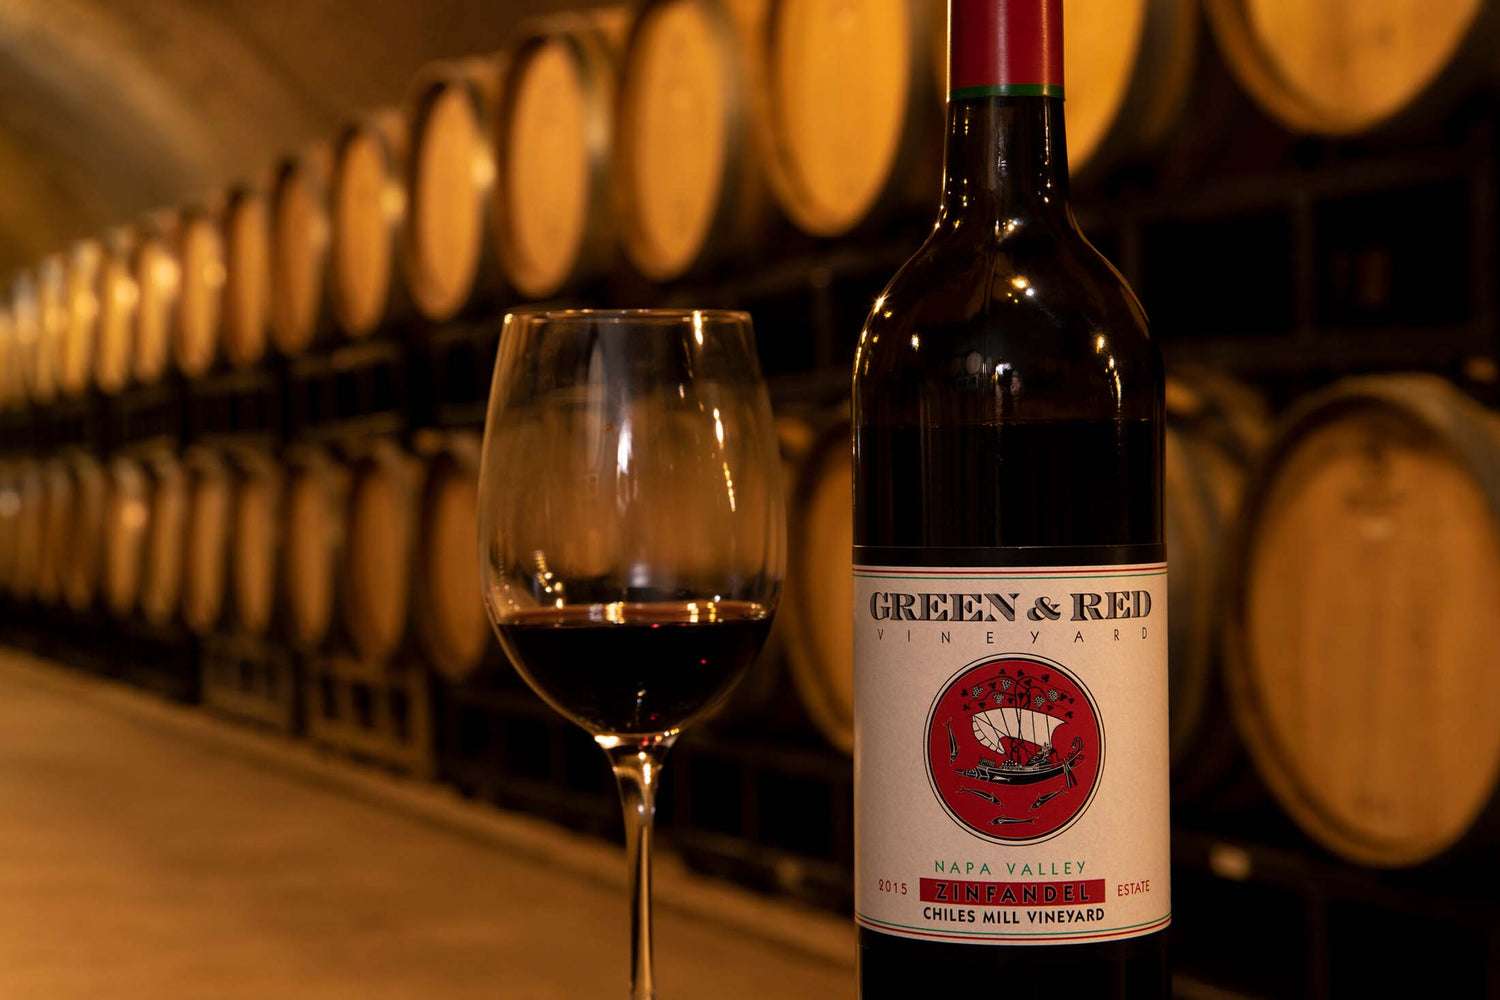 A bottle of Green and Red Zinfandel on a barrel in the cellar